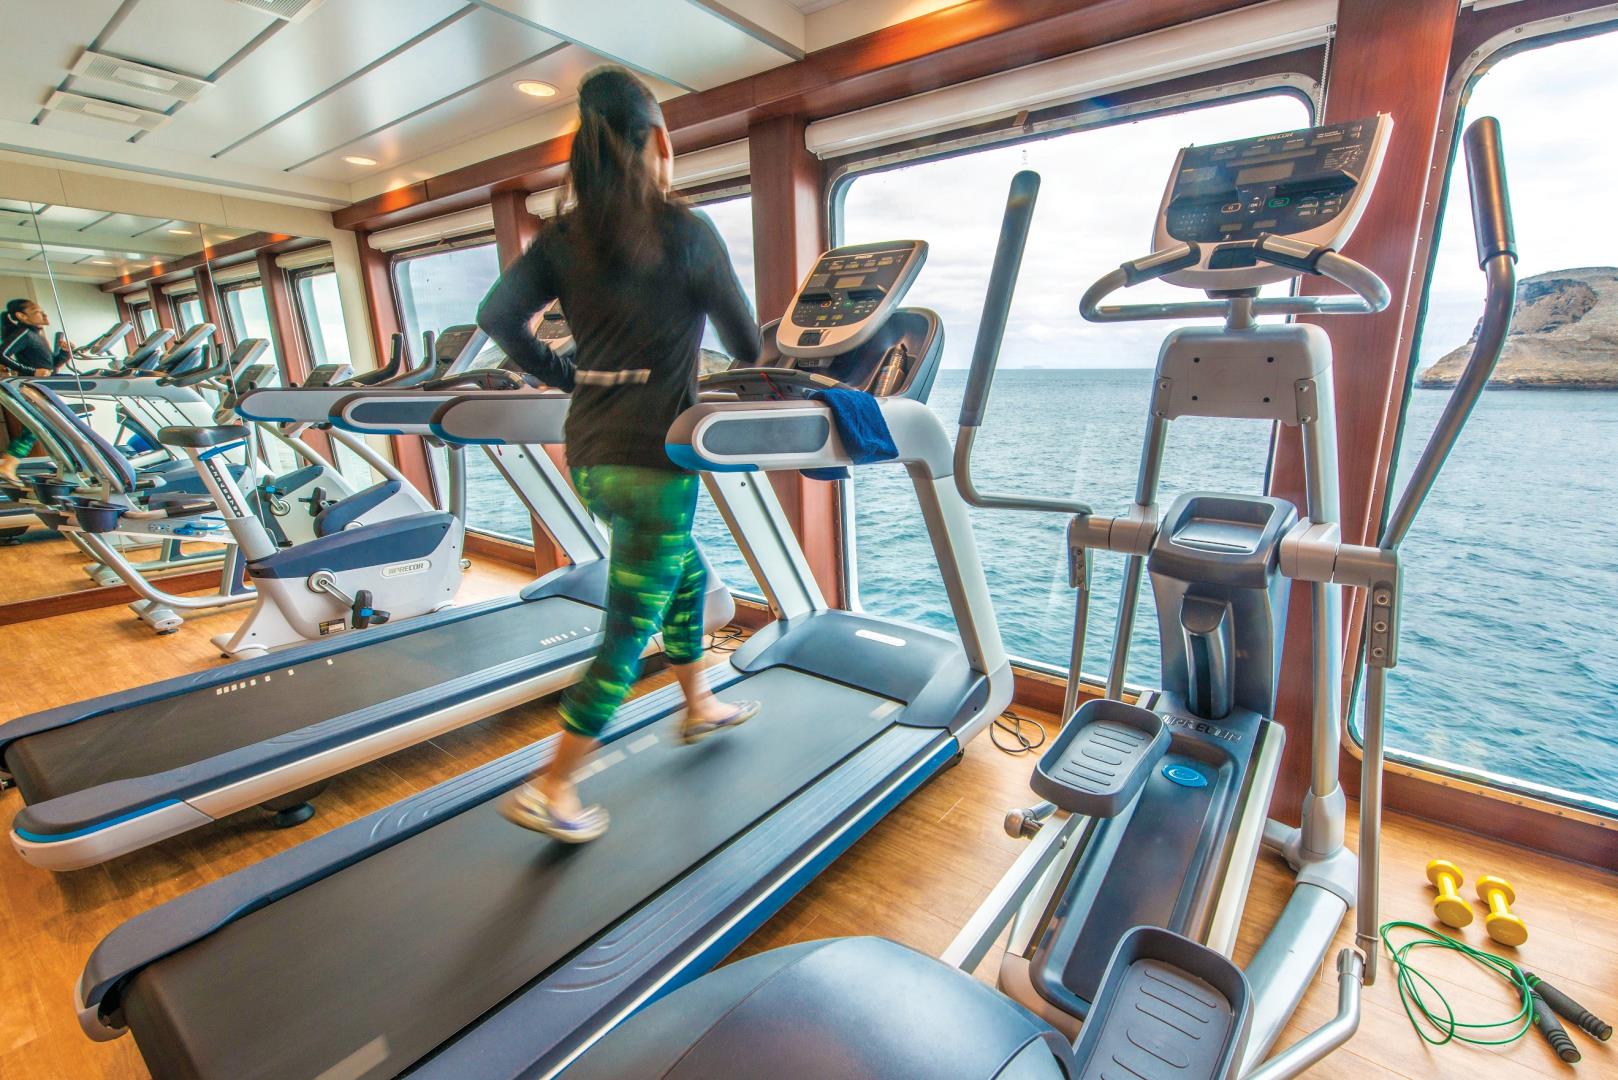 Fitness room on National Geographic Endeavour II